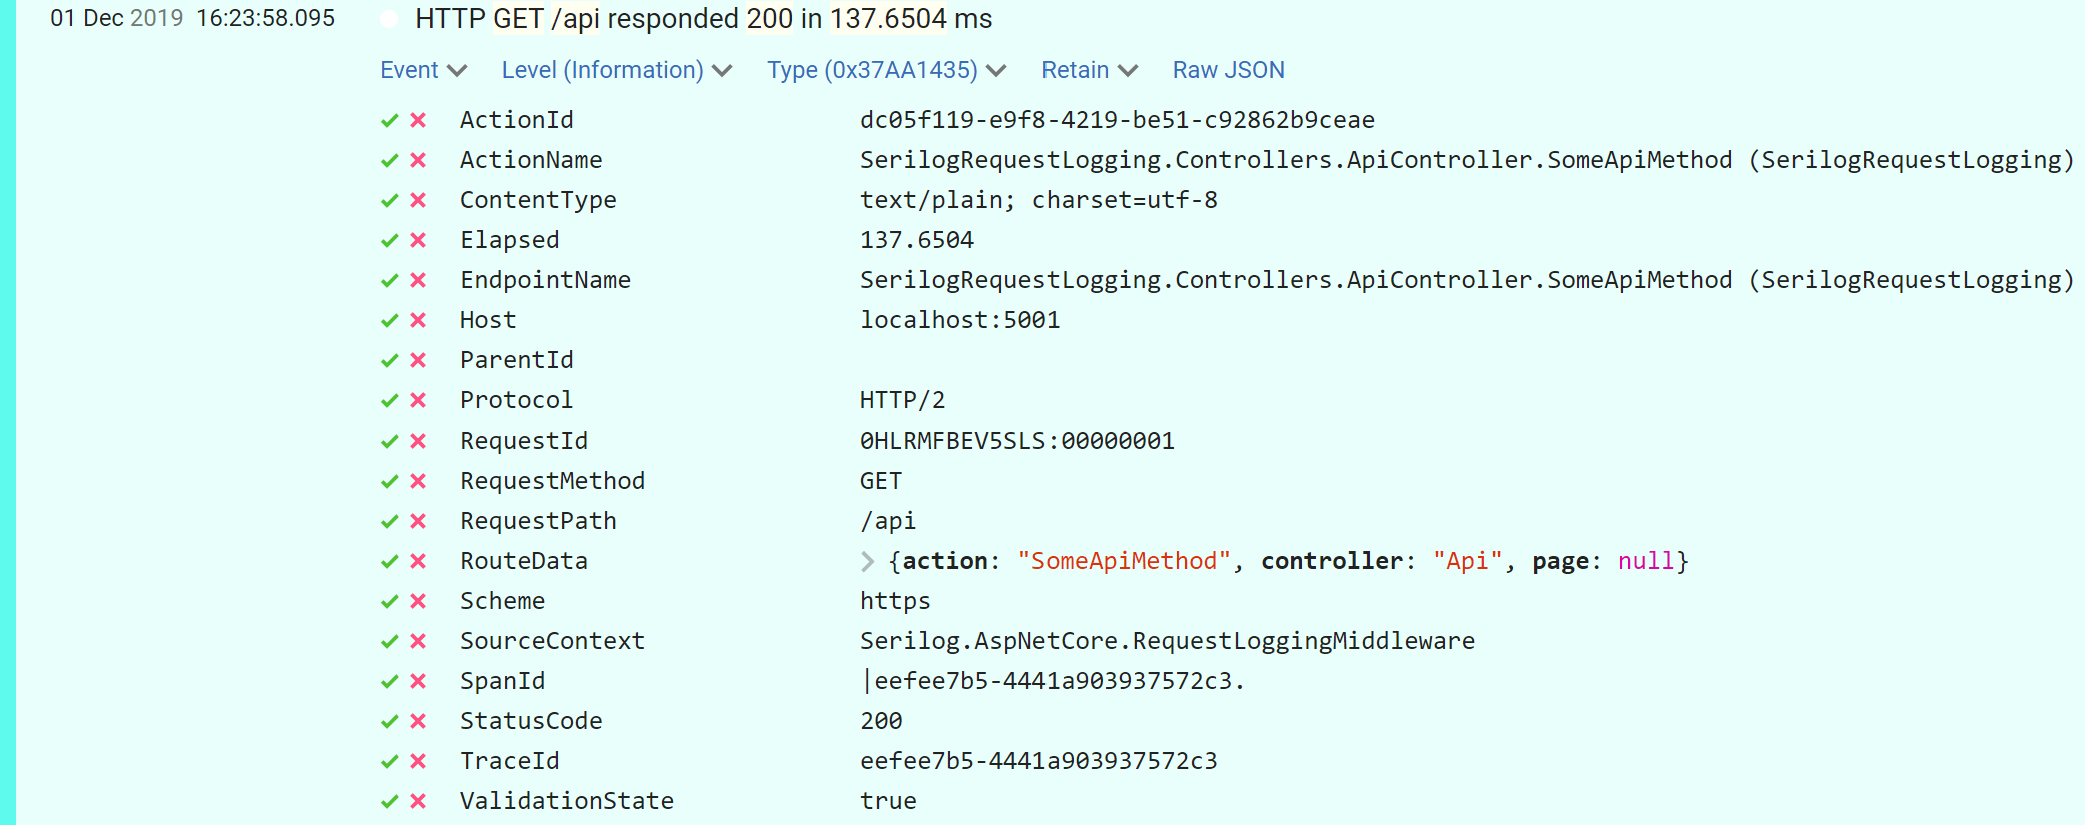 Image of extra MVC properties being recorded on Serilog request log